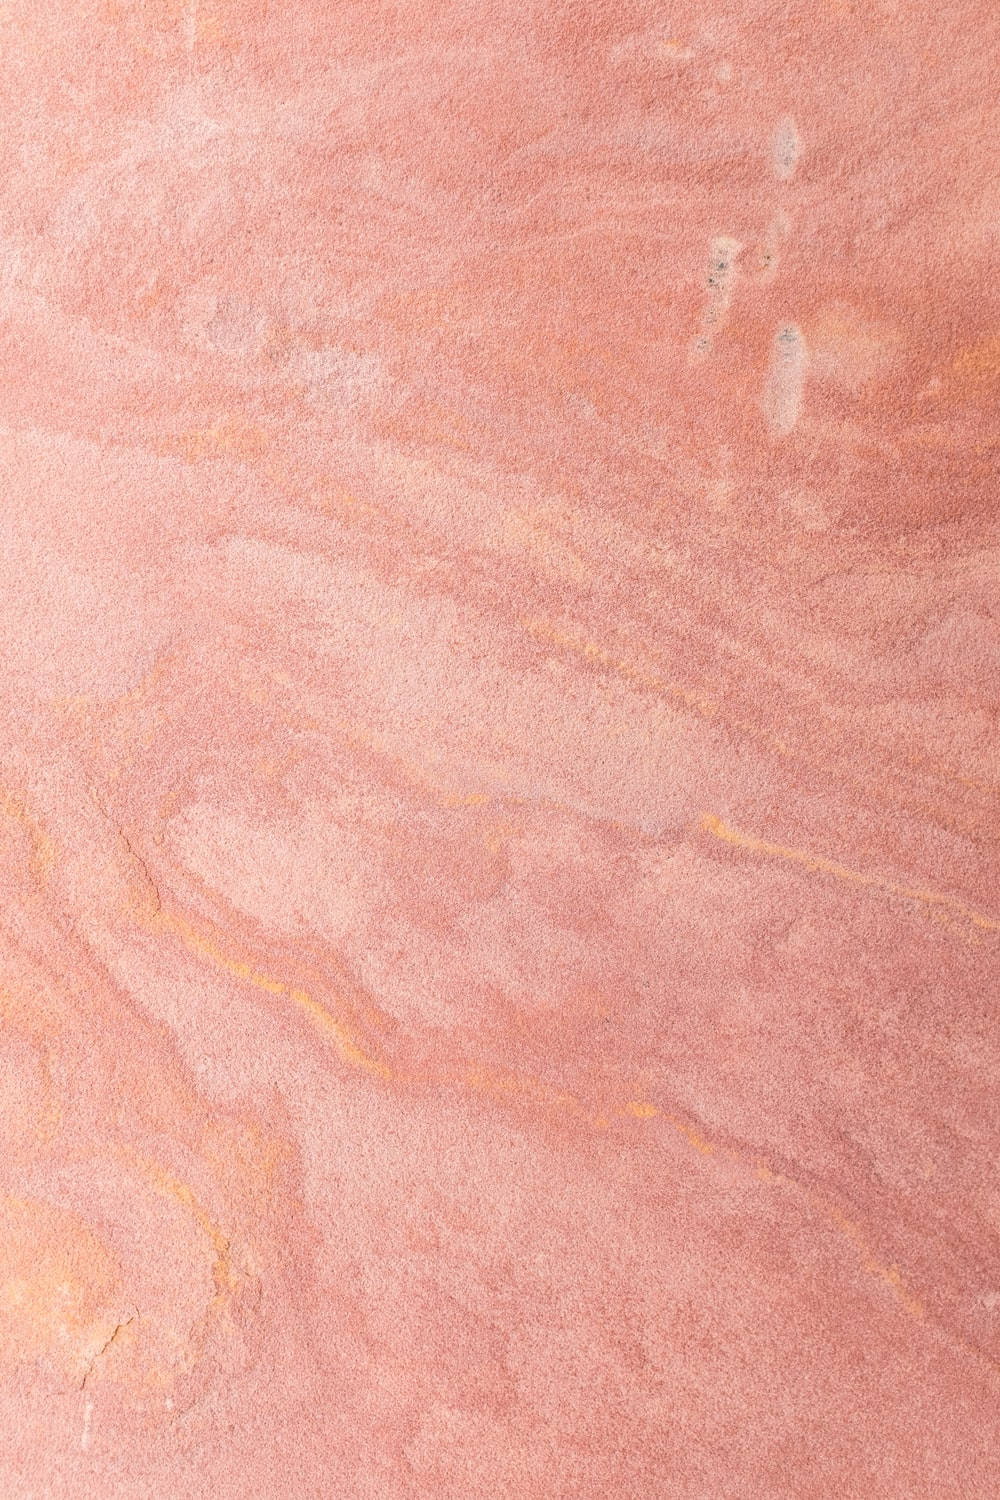 Rose Gold 1000X1500 Wallpaper and Background Image